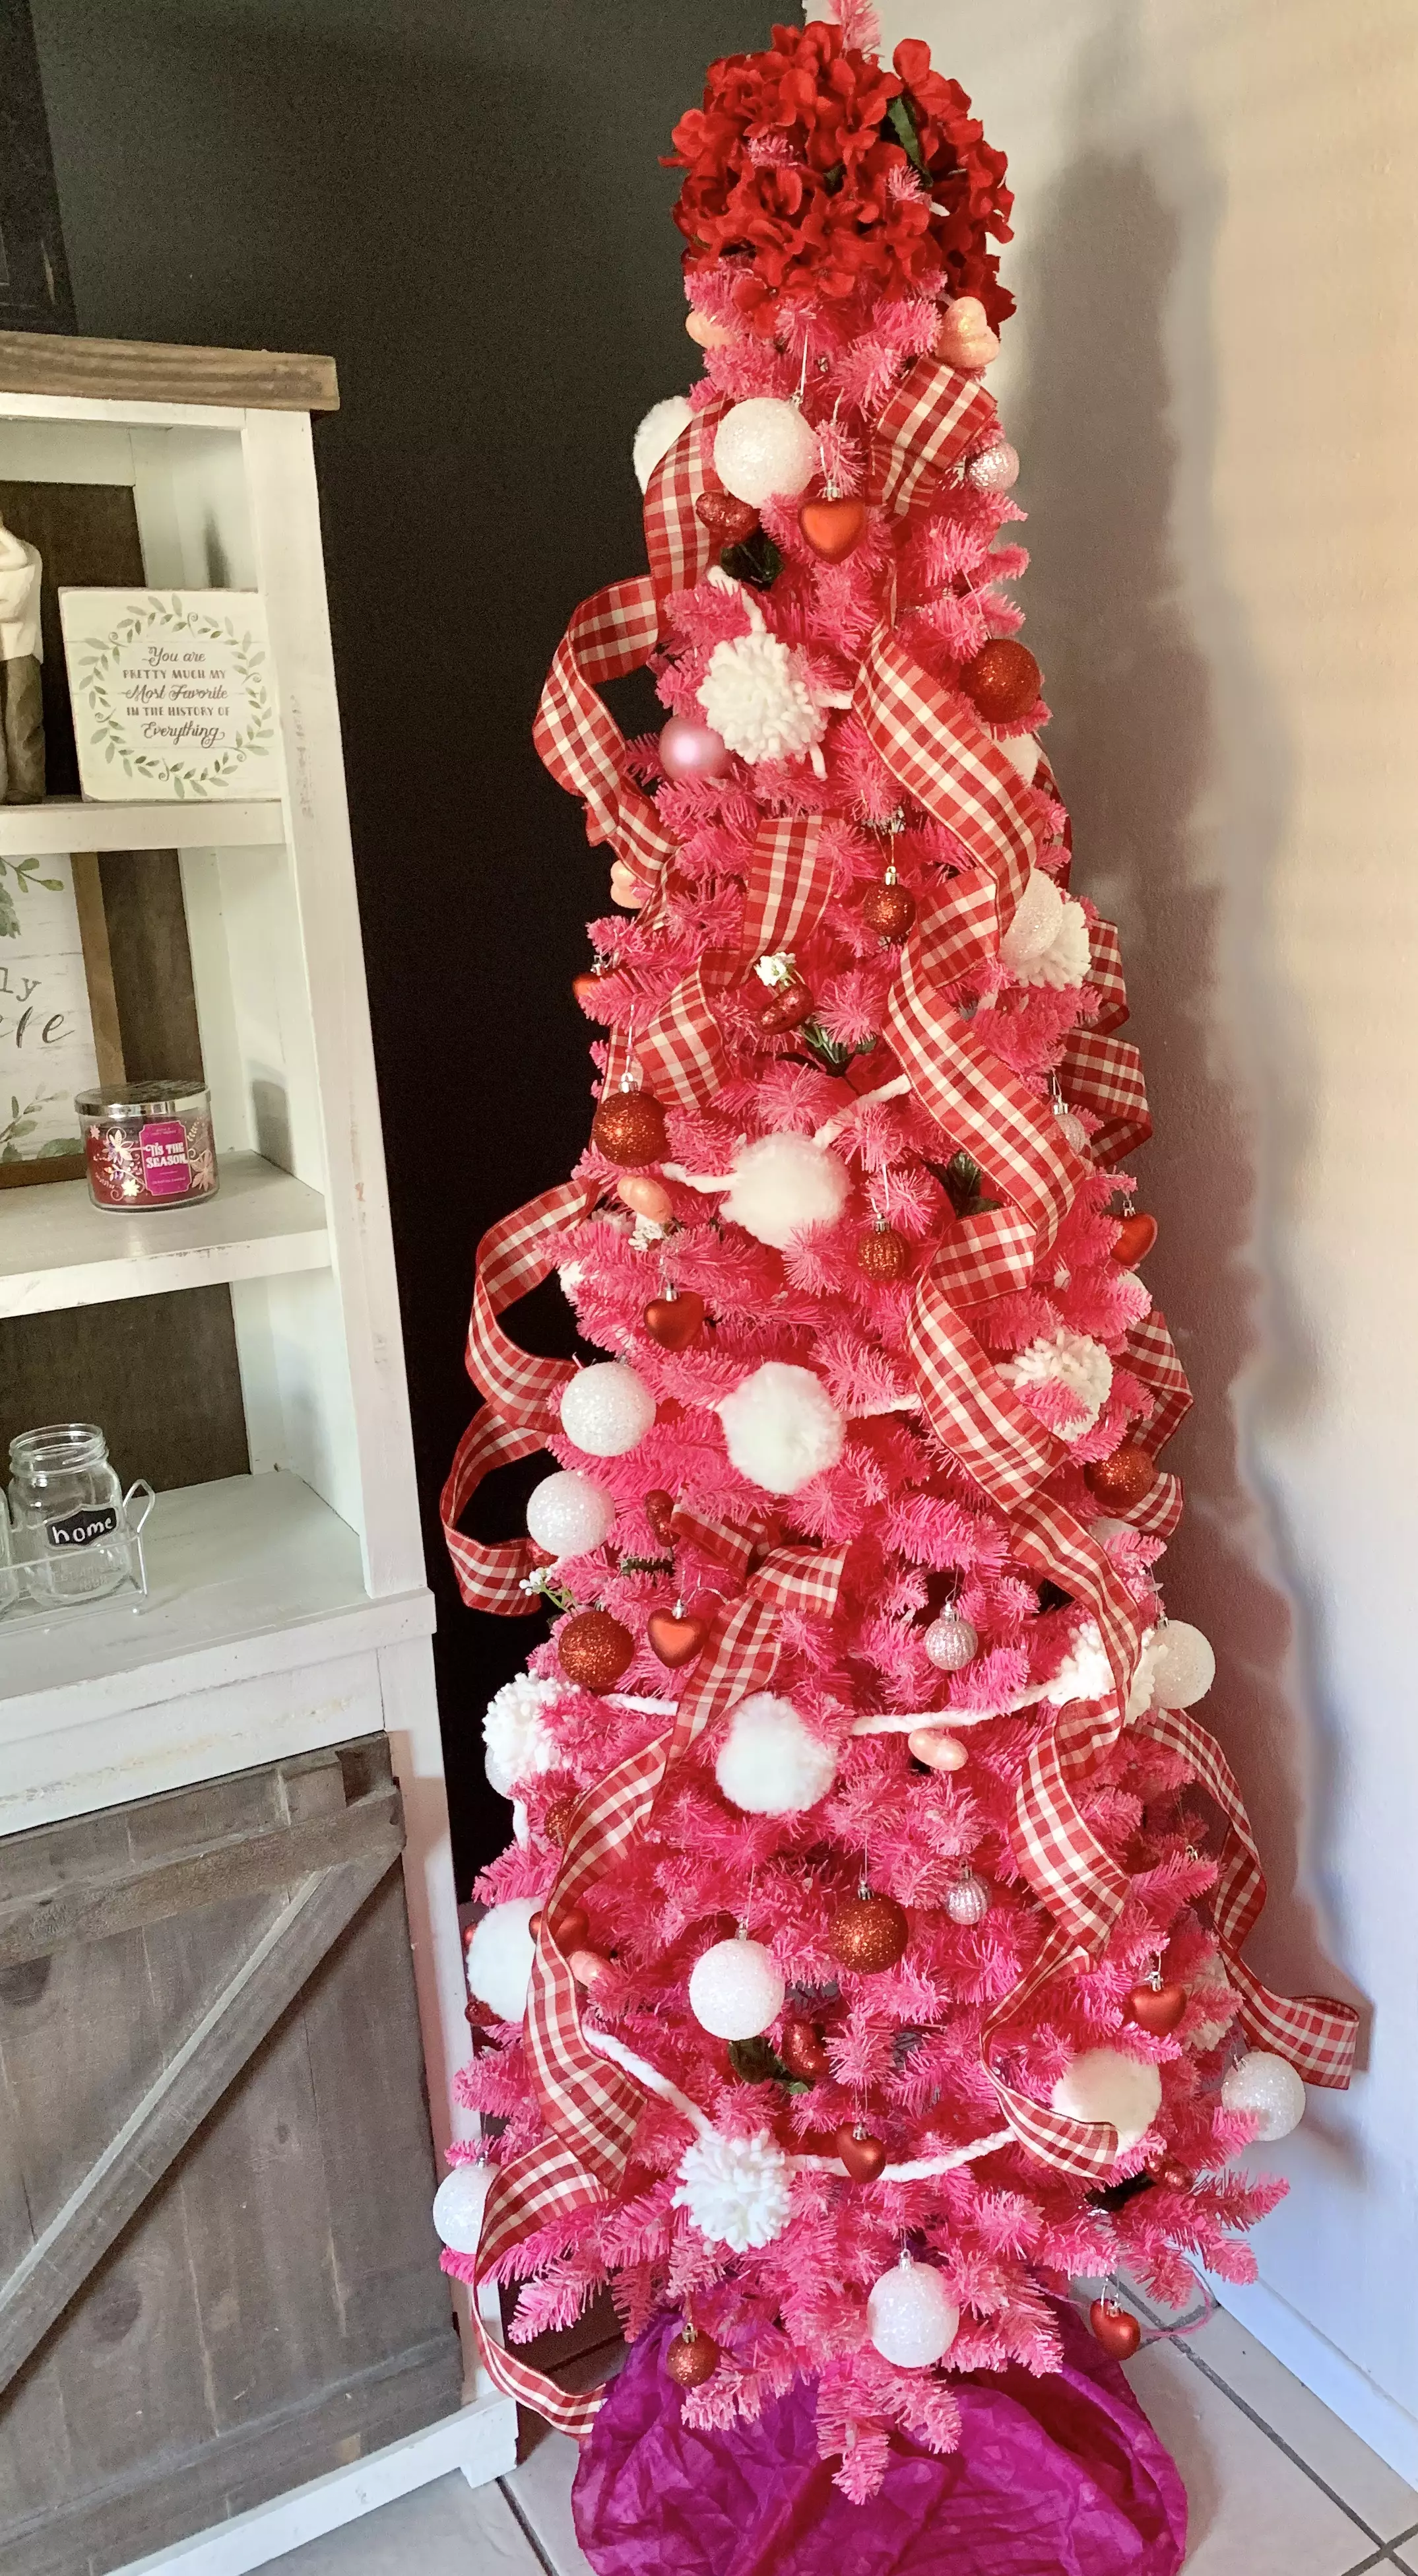 Karina's tree is Valentine's Day embodied thanks to its pink and red theme (